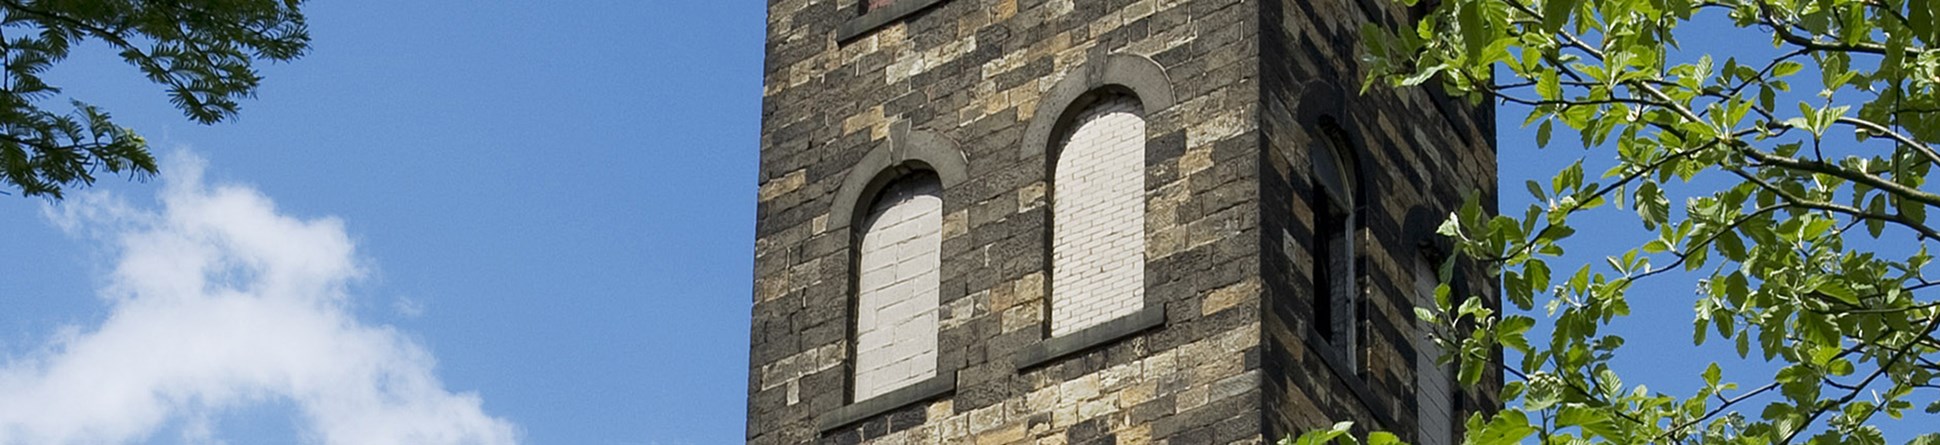 Weavers' Triangle Tower in Burnley, Lancashire - a vacant historic building